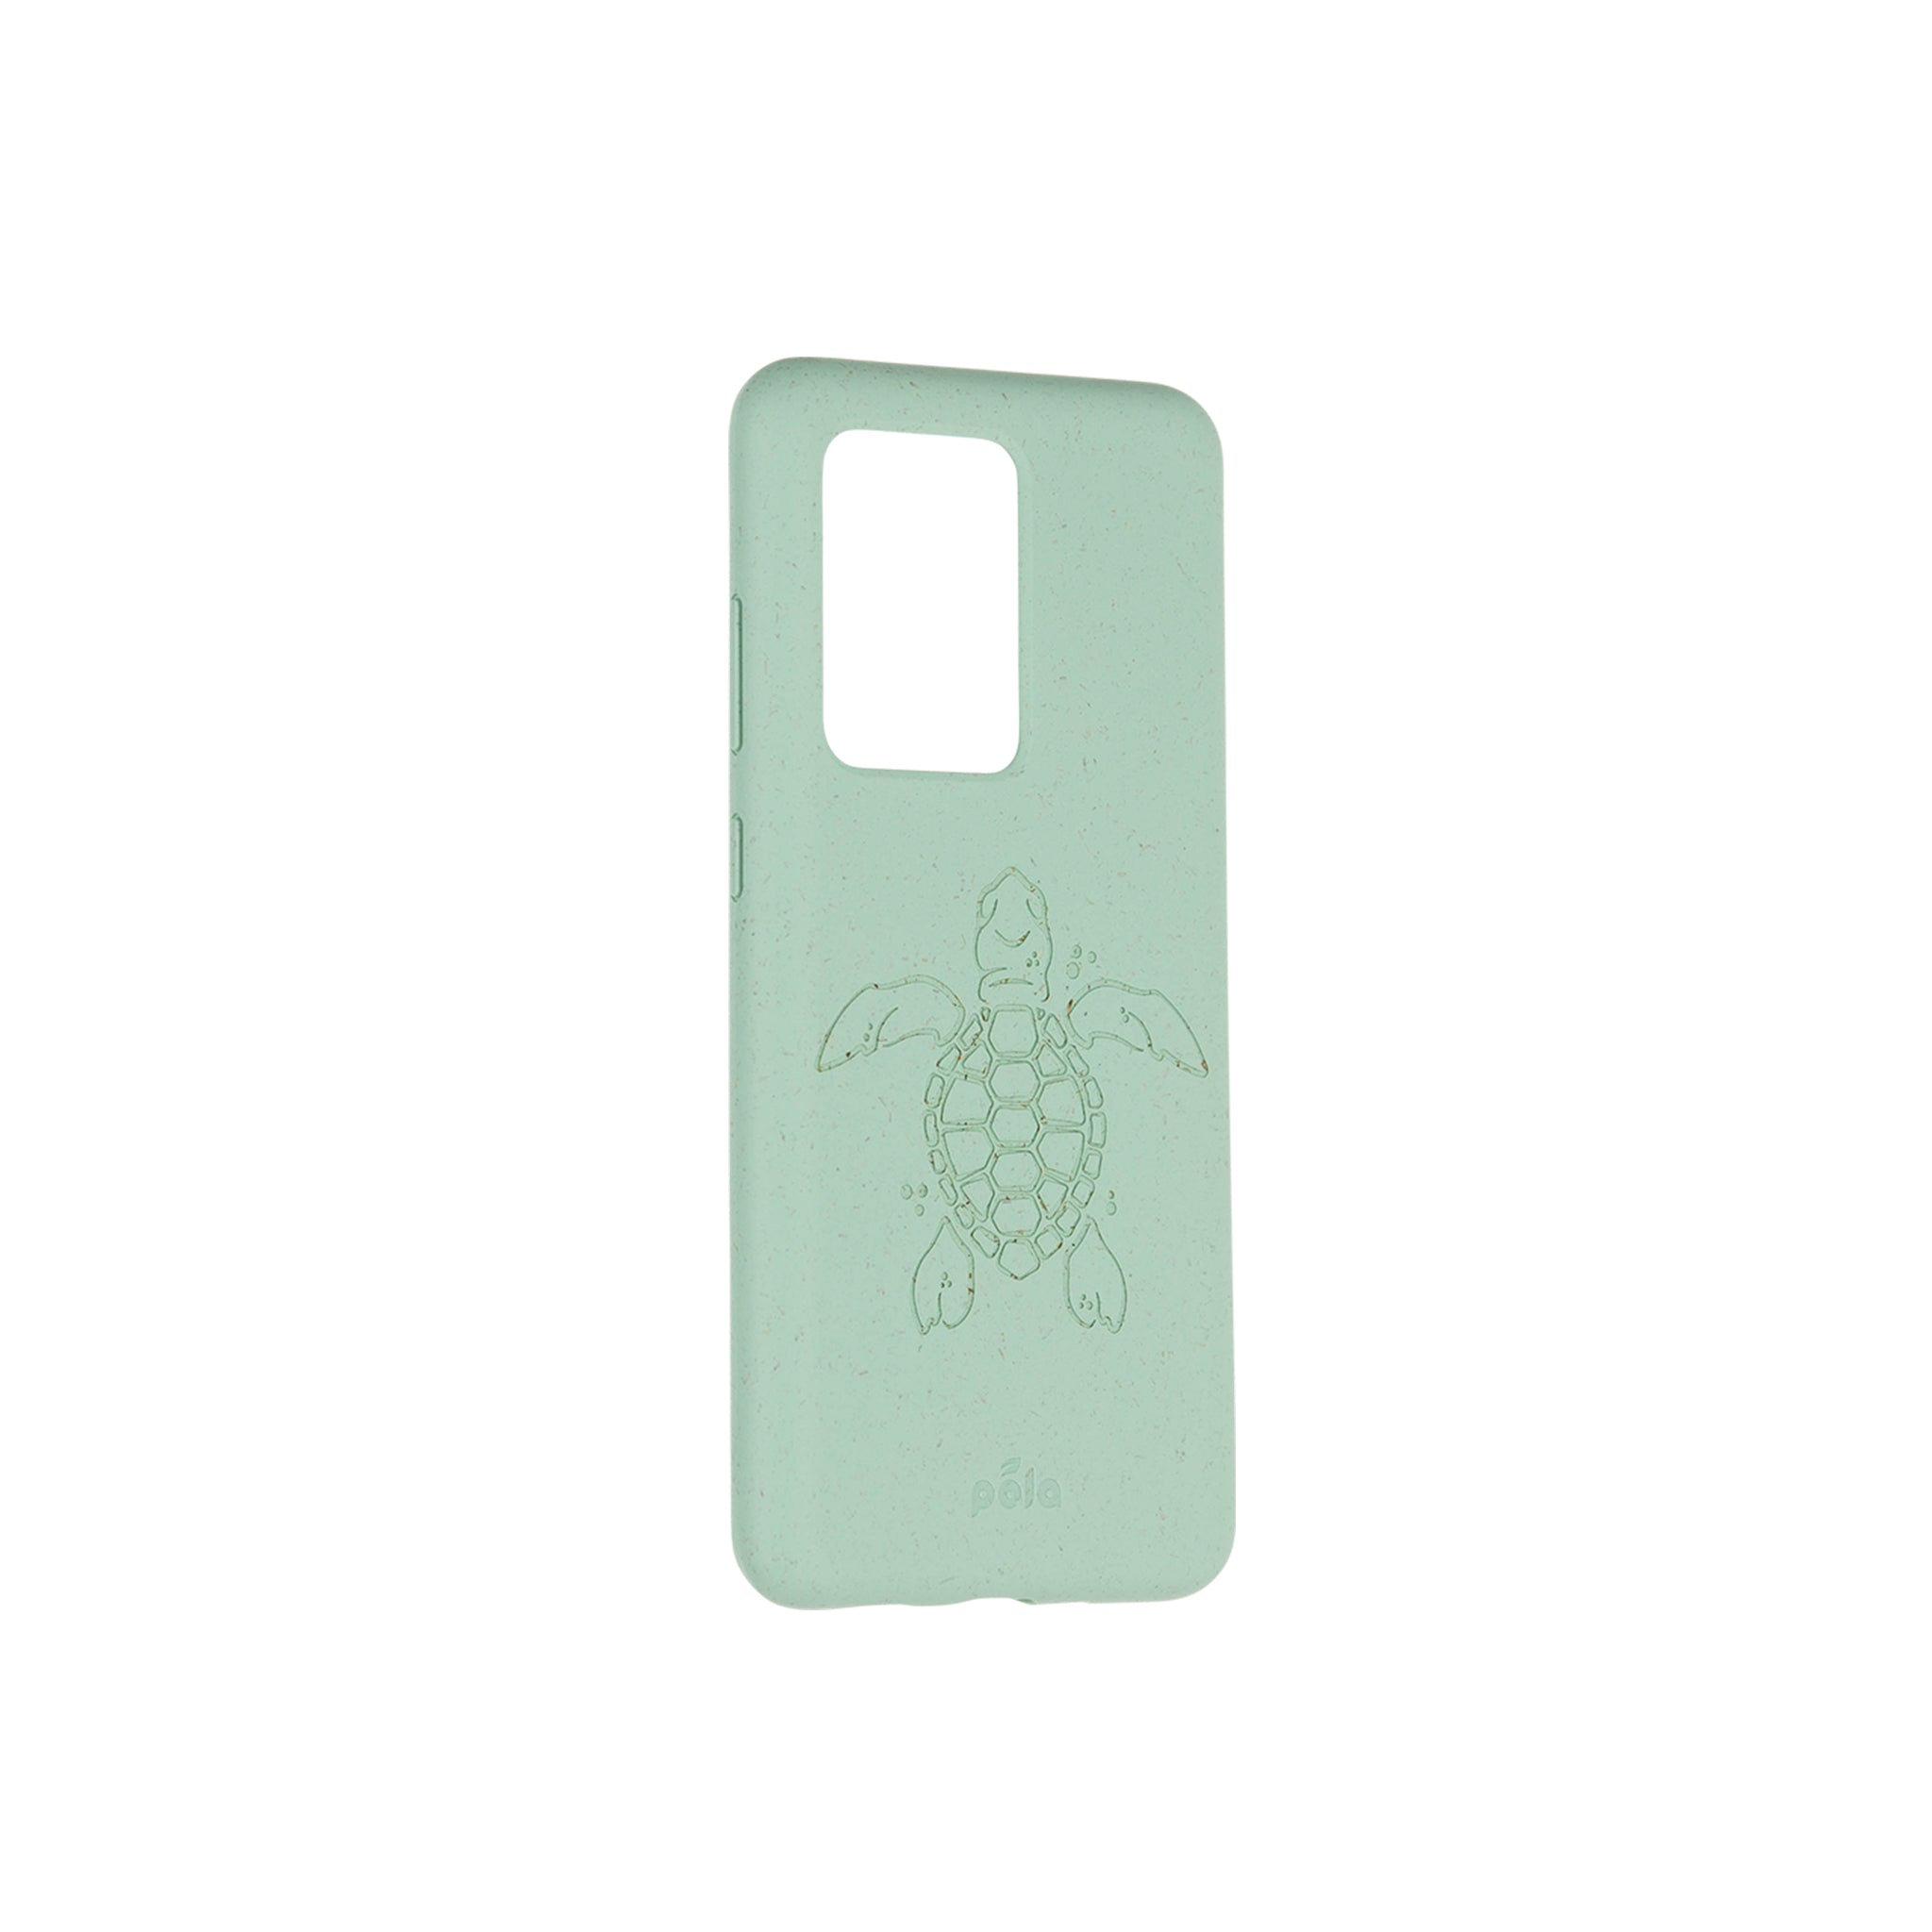 Pela - Eco Friendly Case For Samsung Galaxy S20 Ultra - Ocean Turquoise Turtle Edition